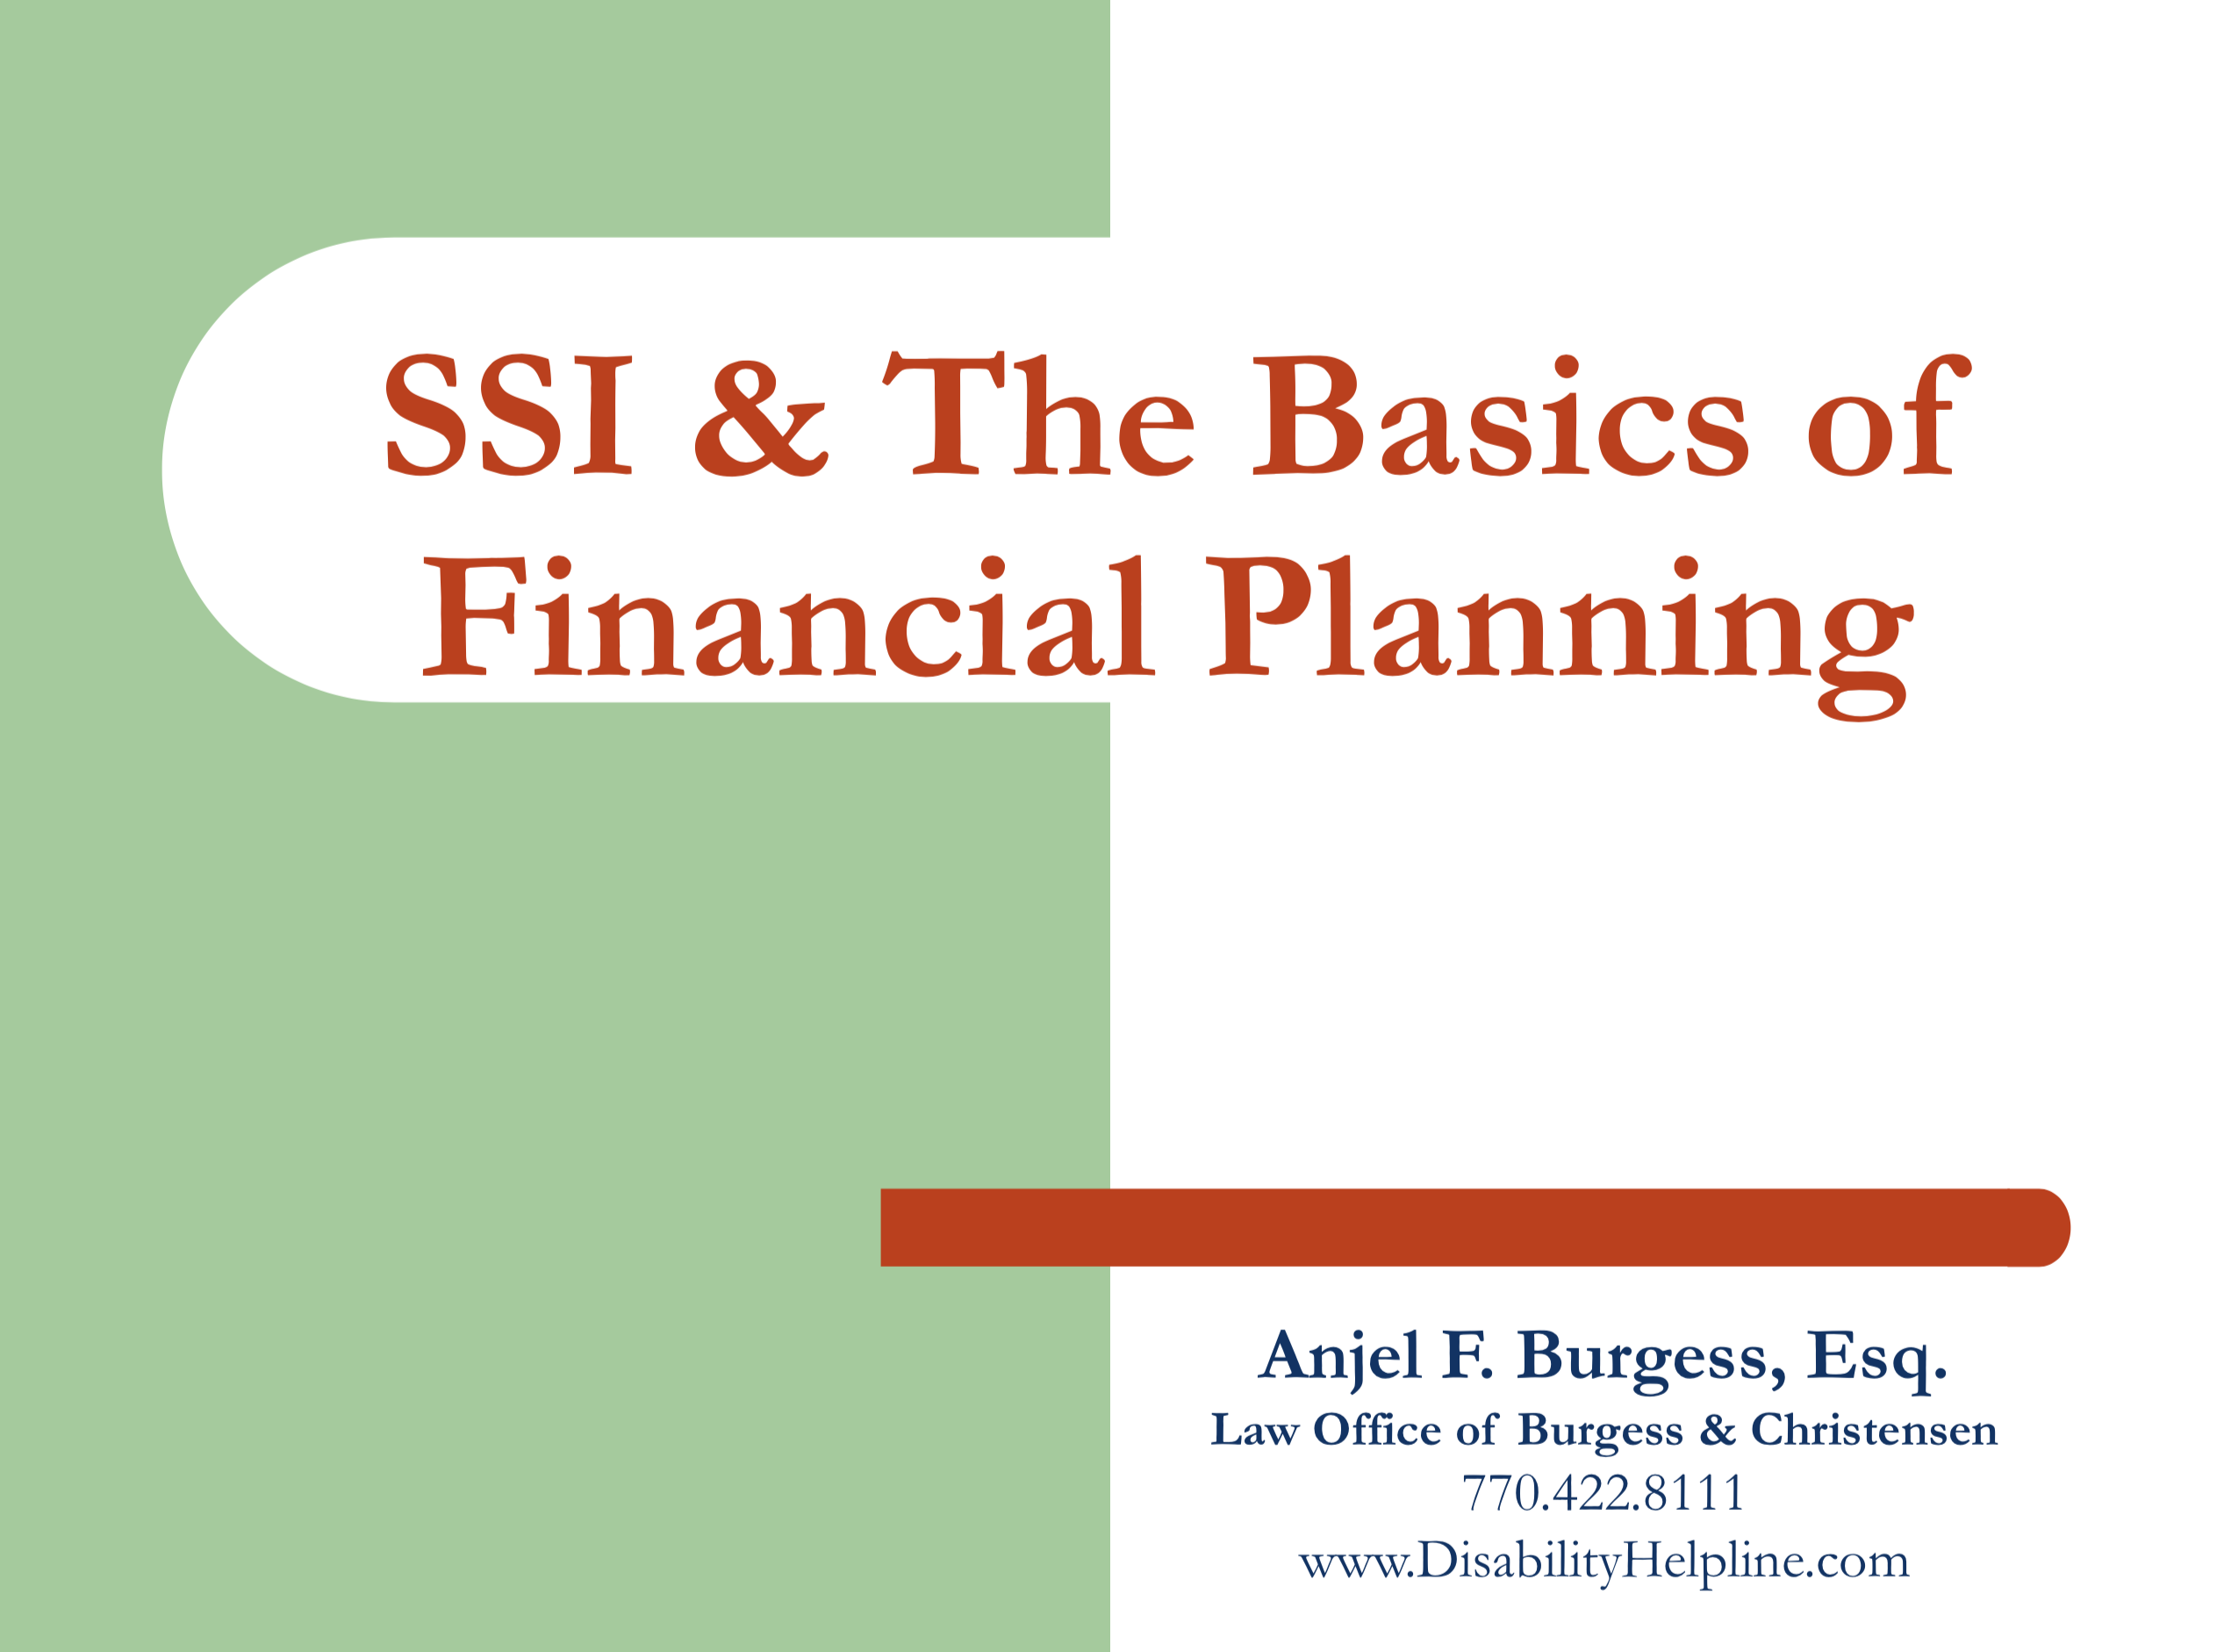 SSI and The Basics of Financial Planning